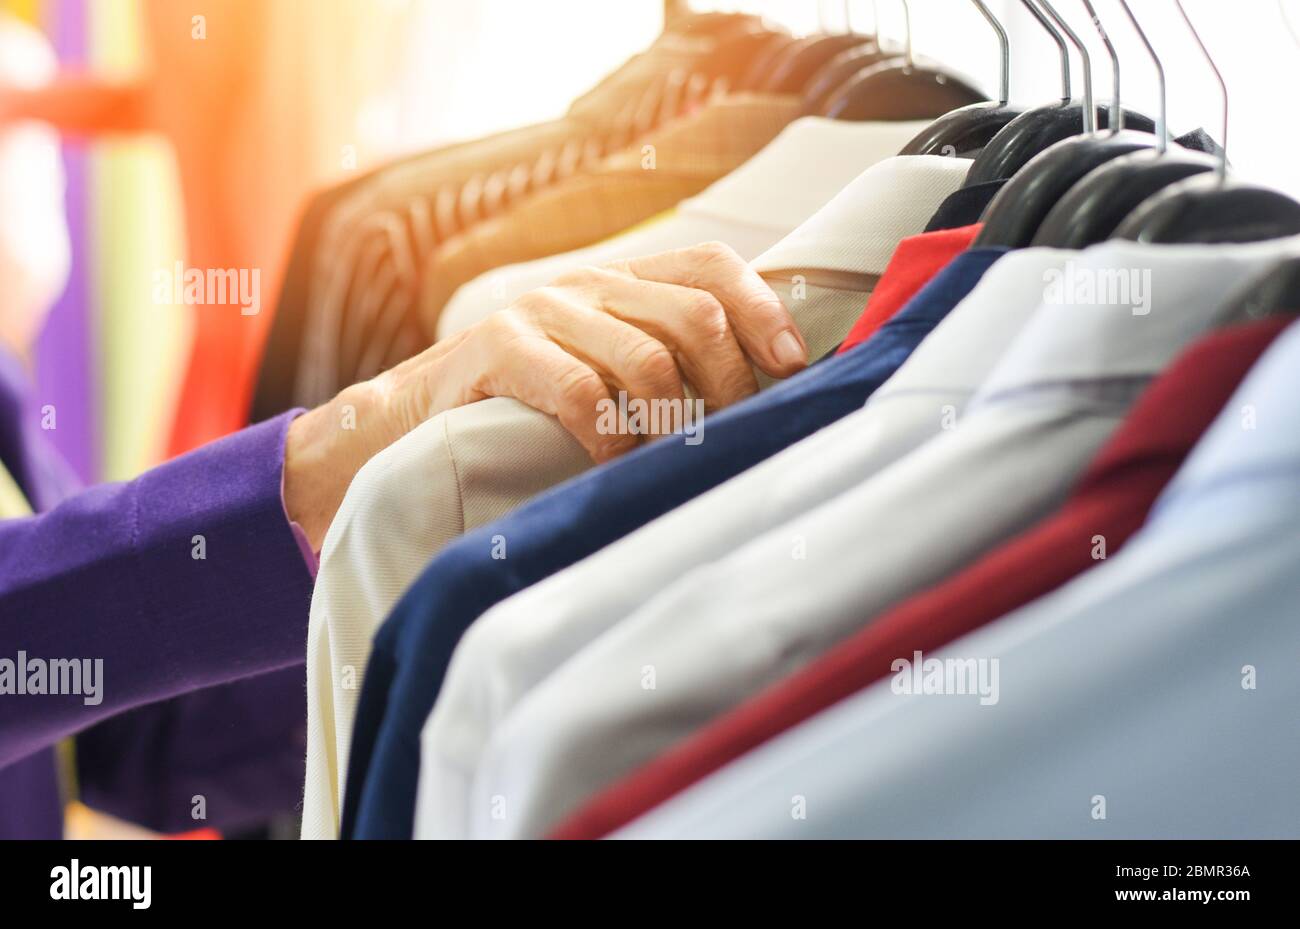 Men fashion clothes / Hanging clothes suit colorful or closet rack different coloured man suits in a closet on hangers in a store or showroom Stock Photo